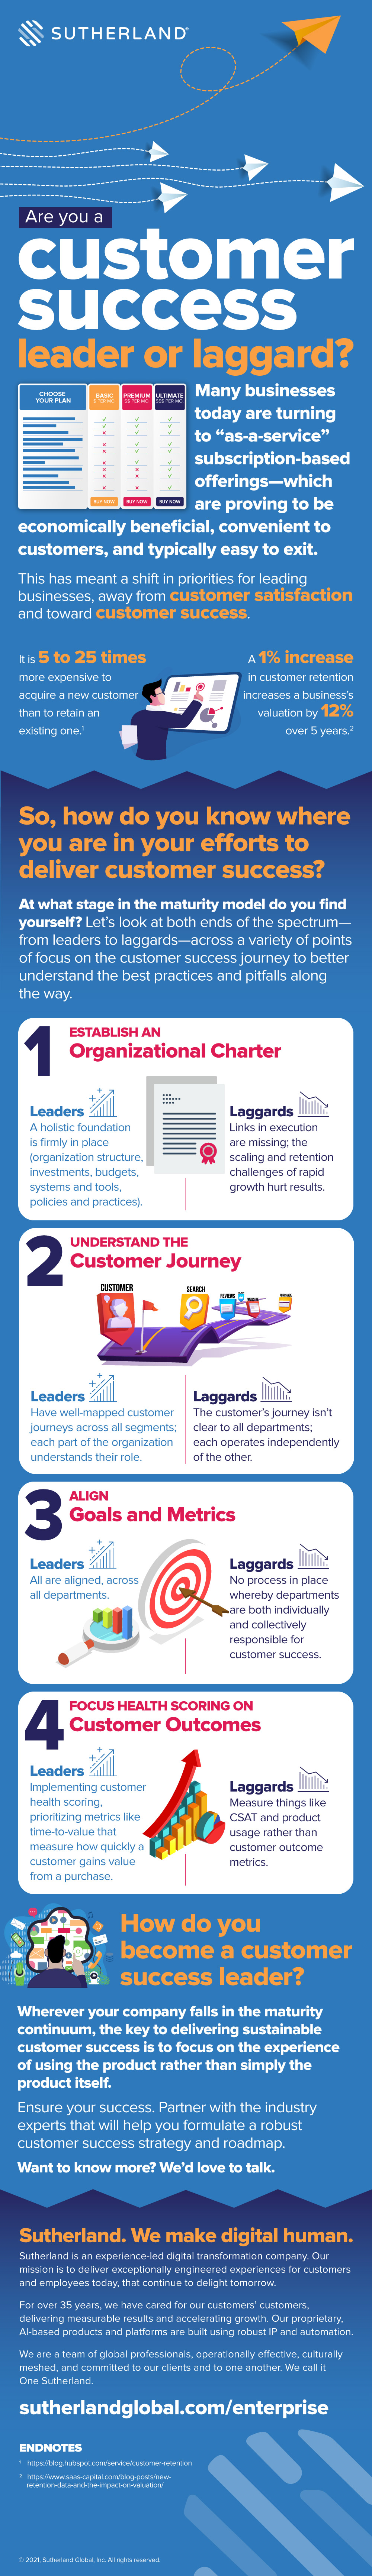 Are You A Customer Success Leader Or Laggard?